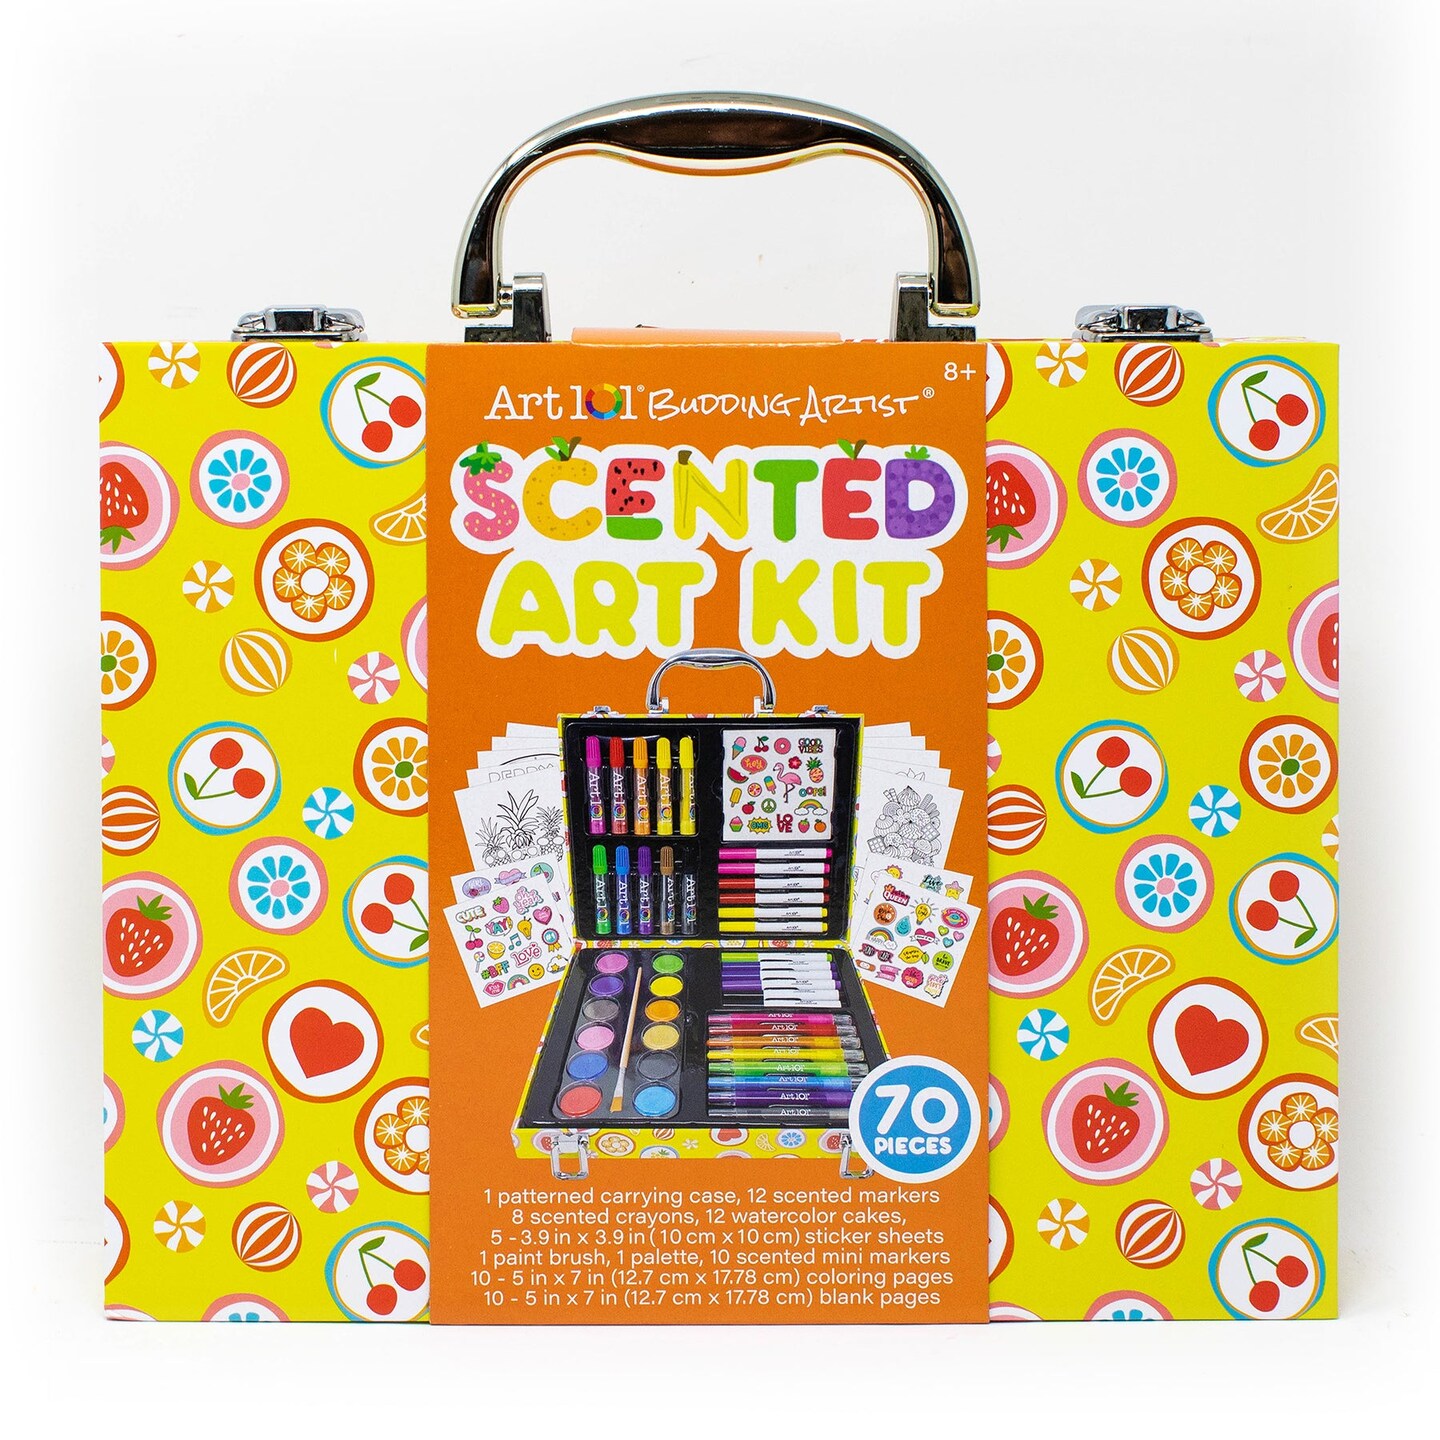 Young Artist Coloring Gift Set